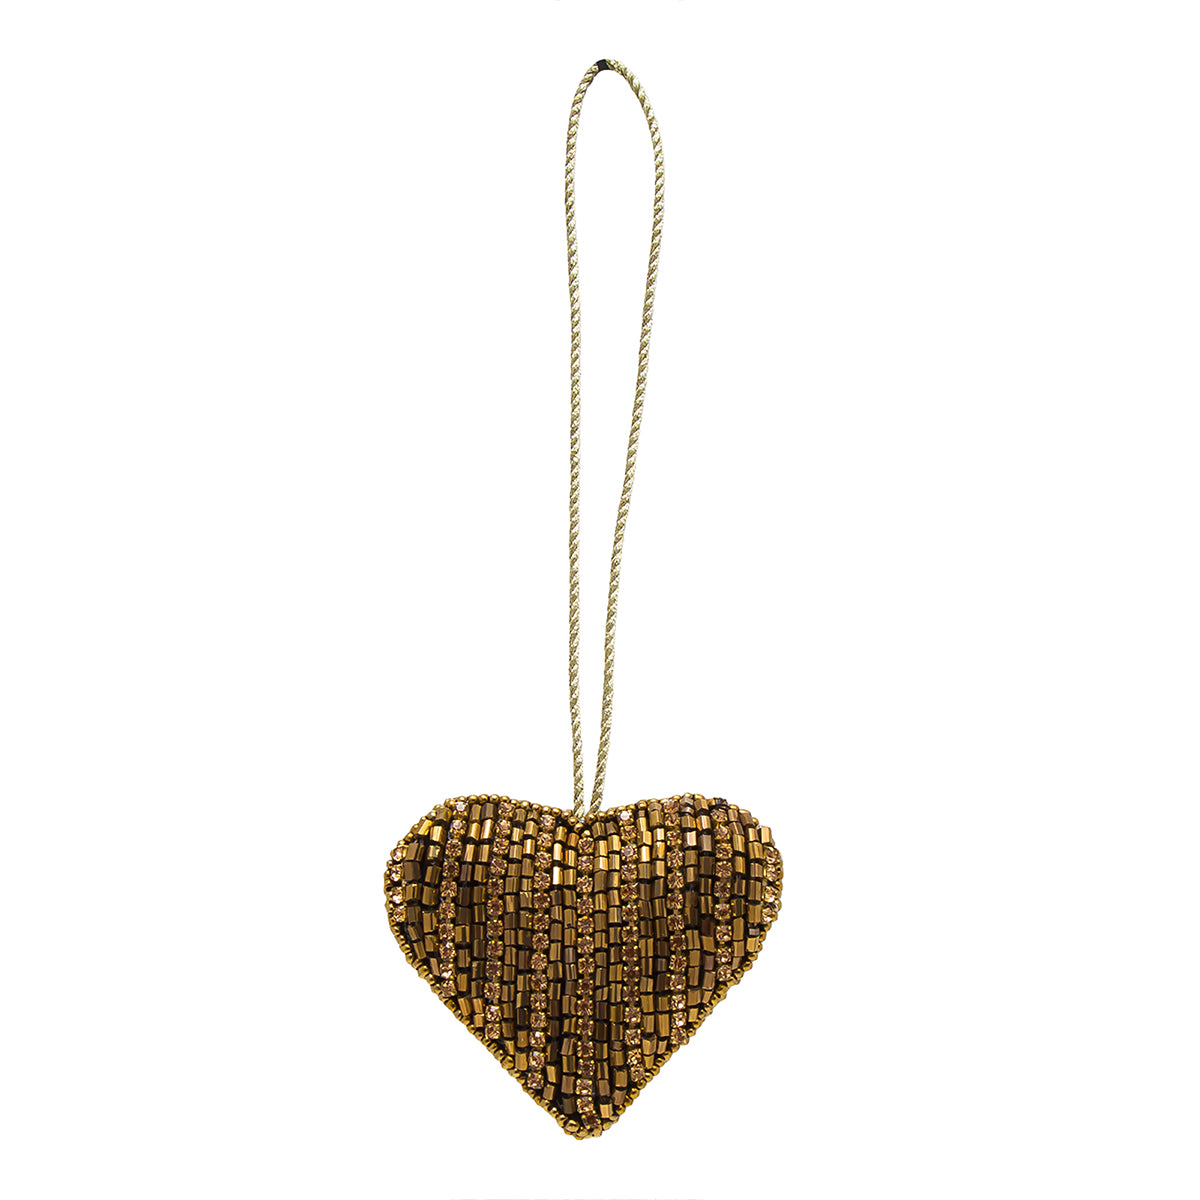 Beaded Heart Christmas Ornament with Studs